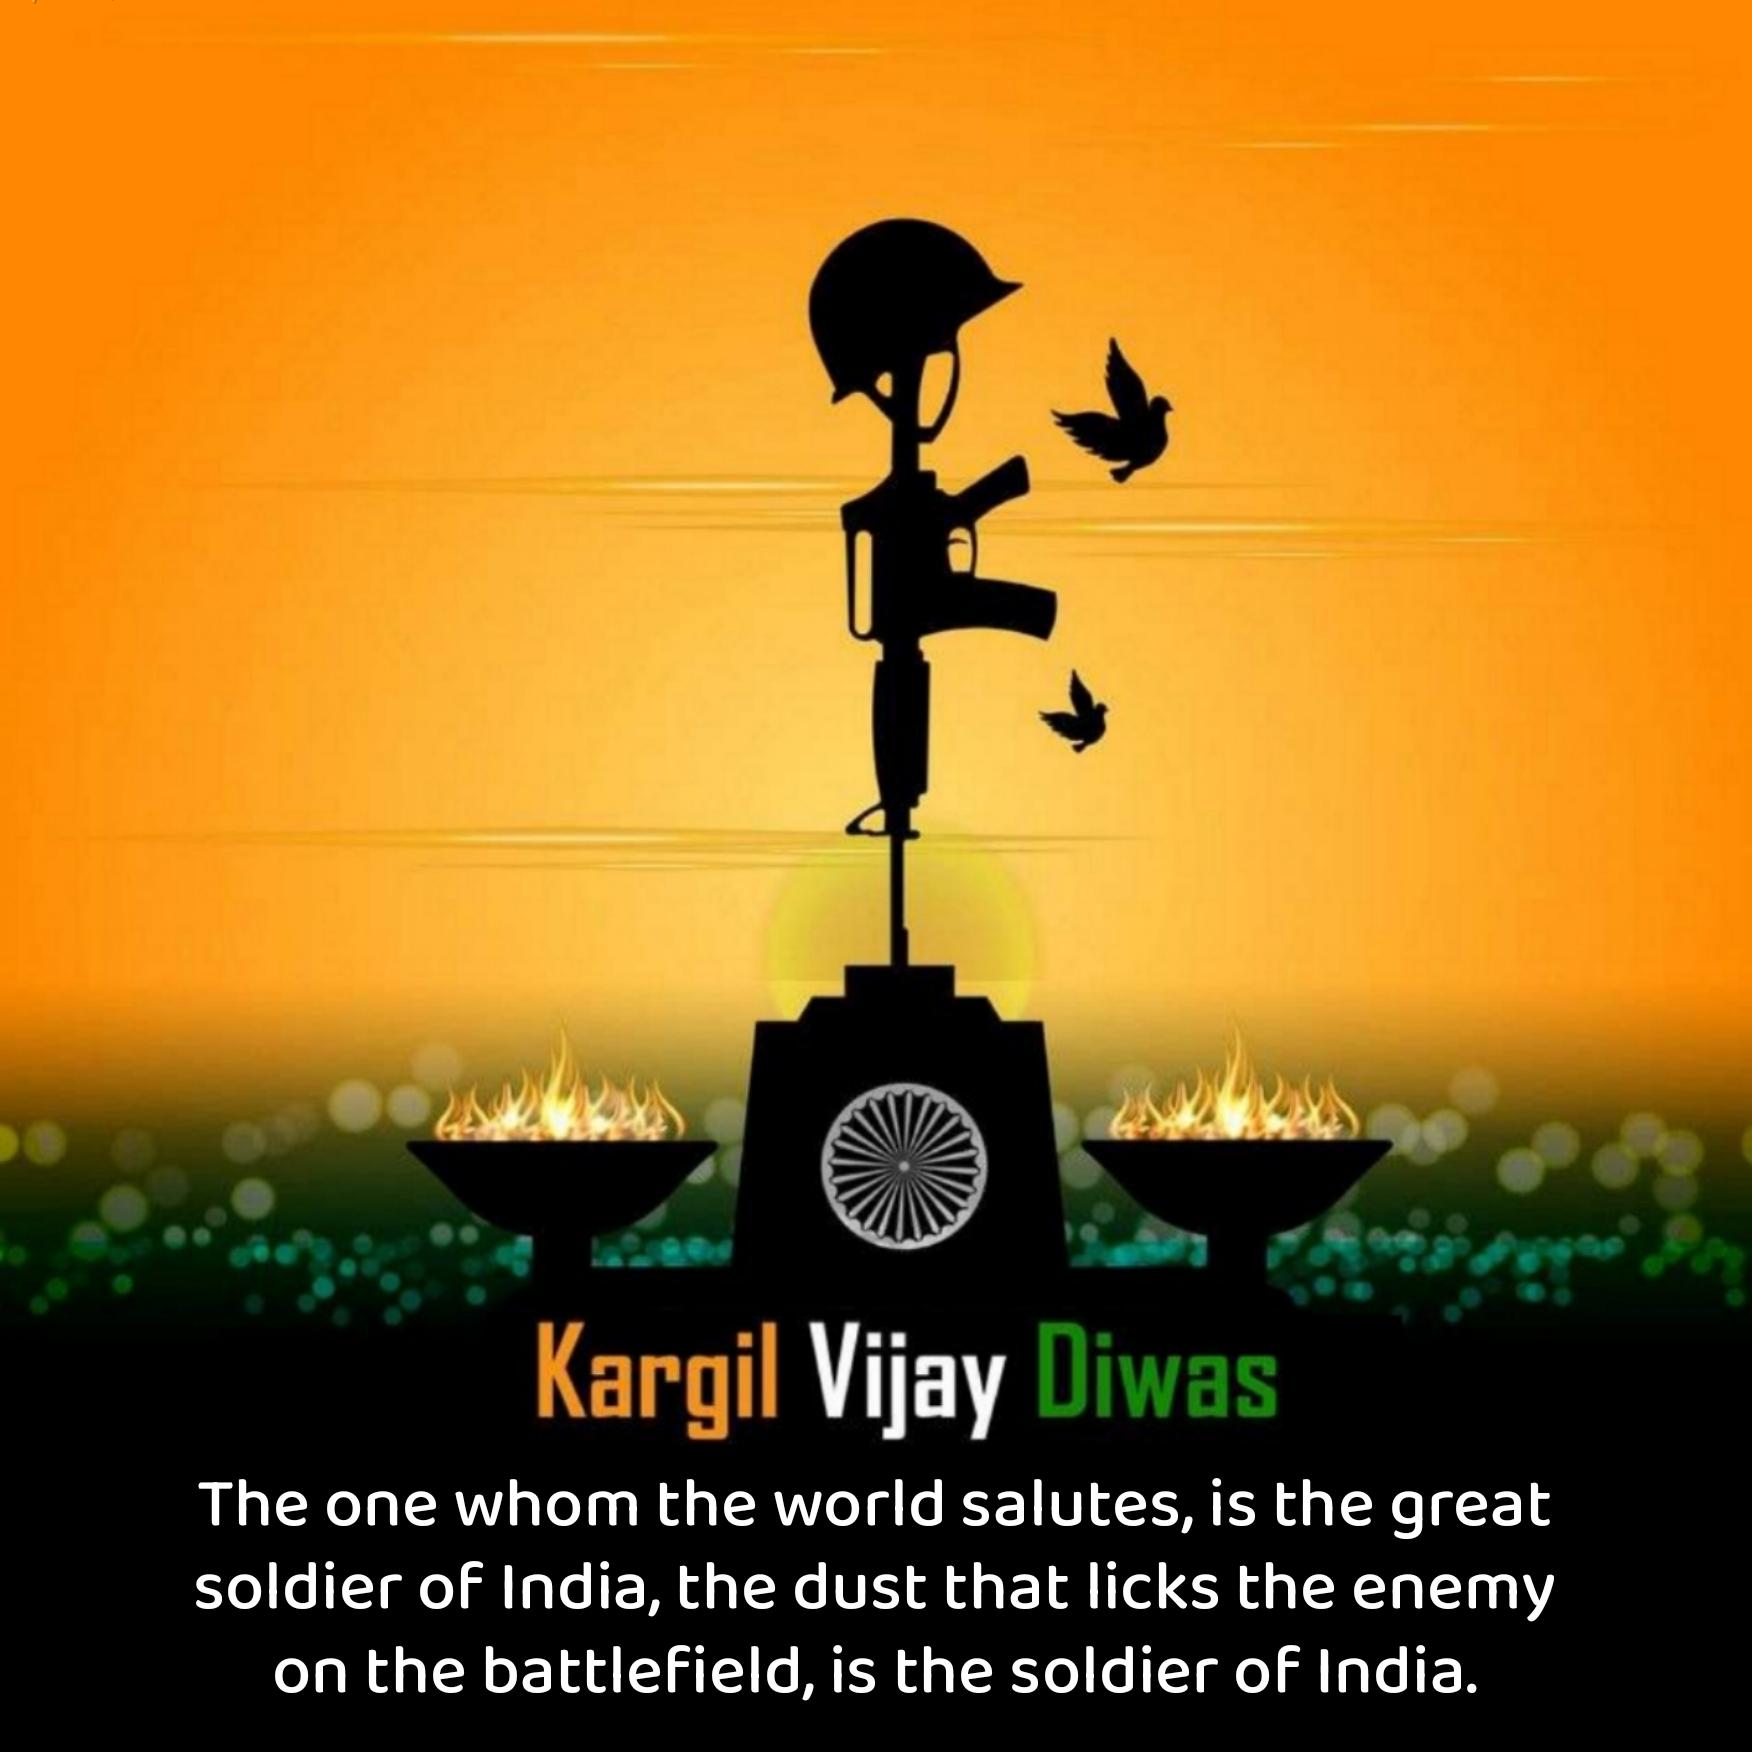 The one whom the world salutes is the great soldier of India